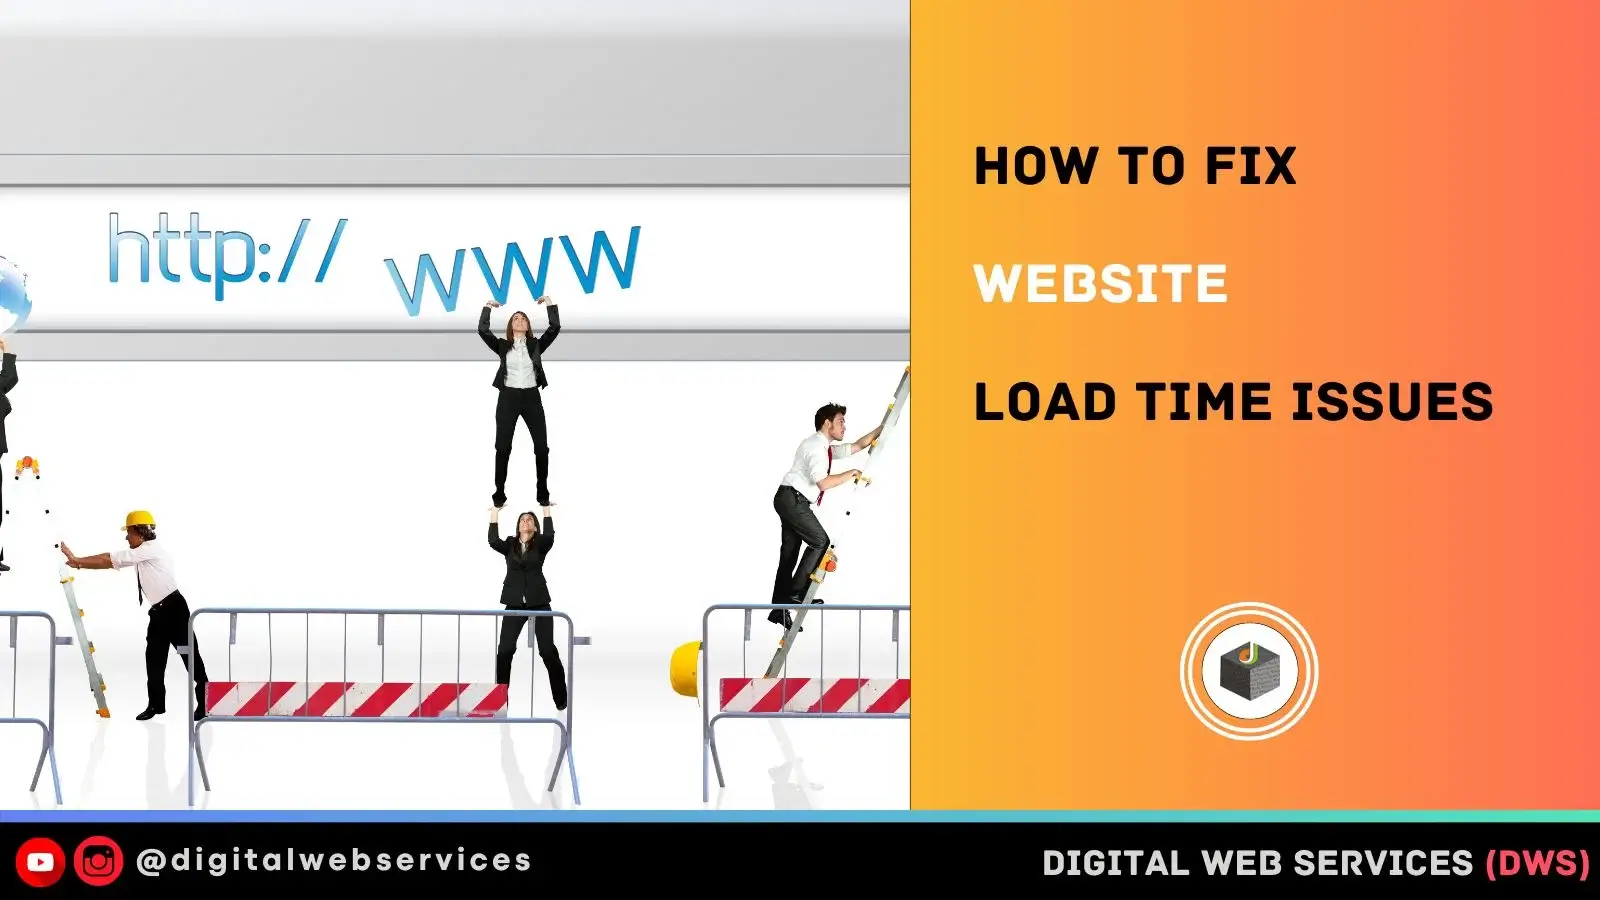 How to Fix Website Load Time Issues